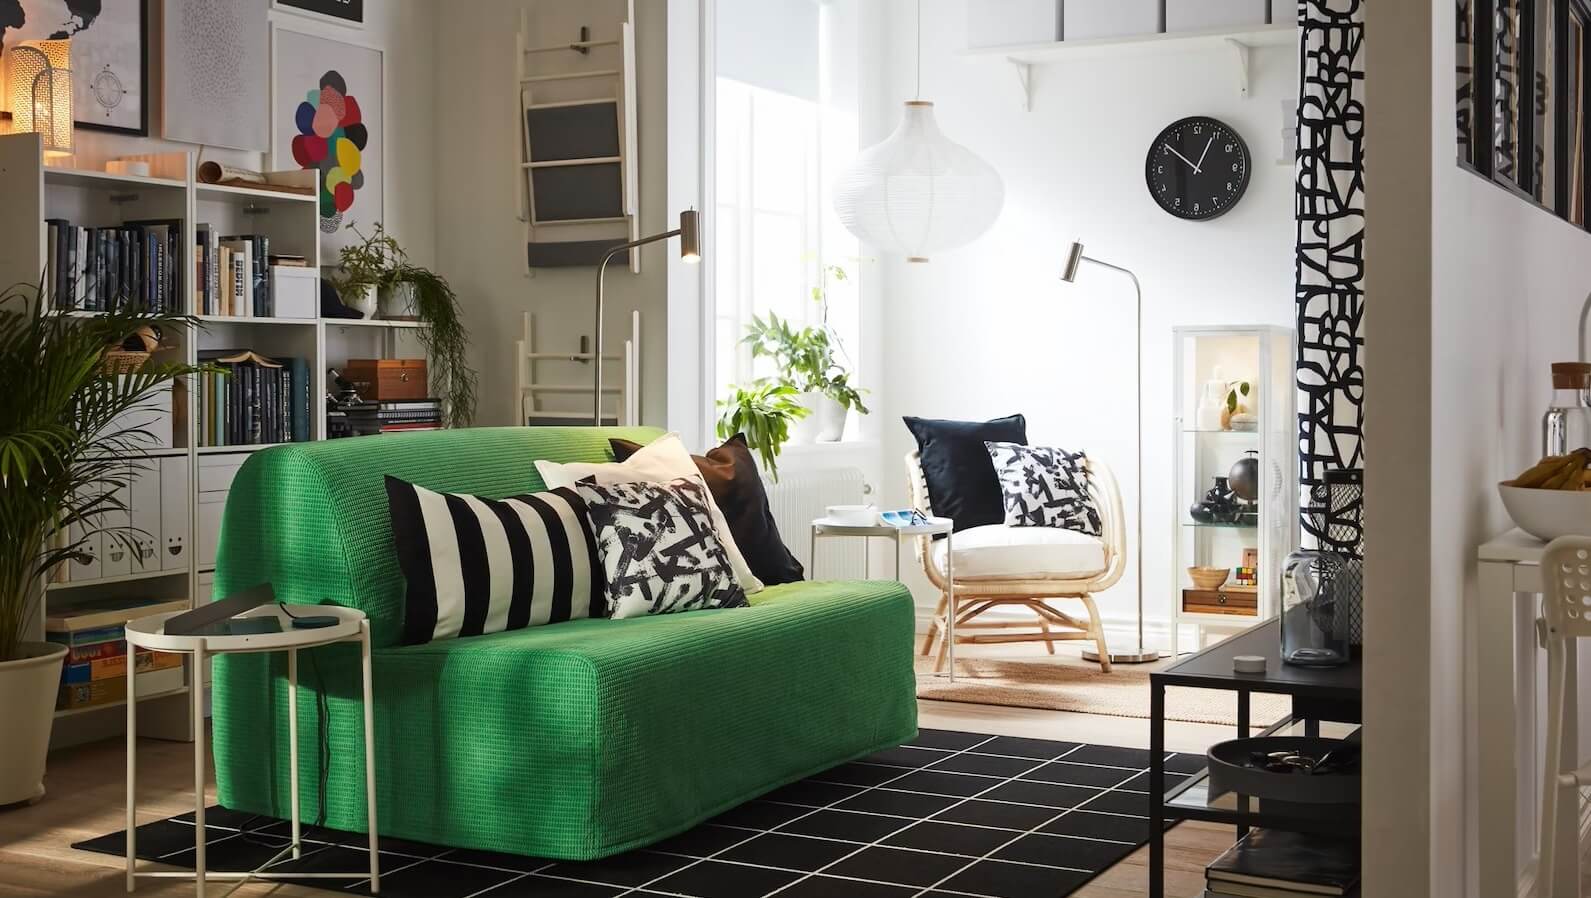 Mismatch Sofa And Armchair To Structure The Space 